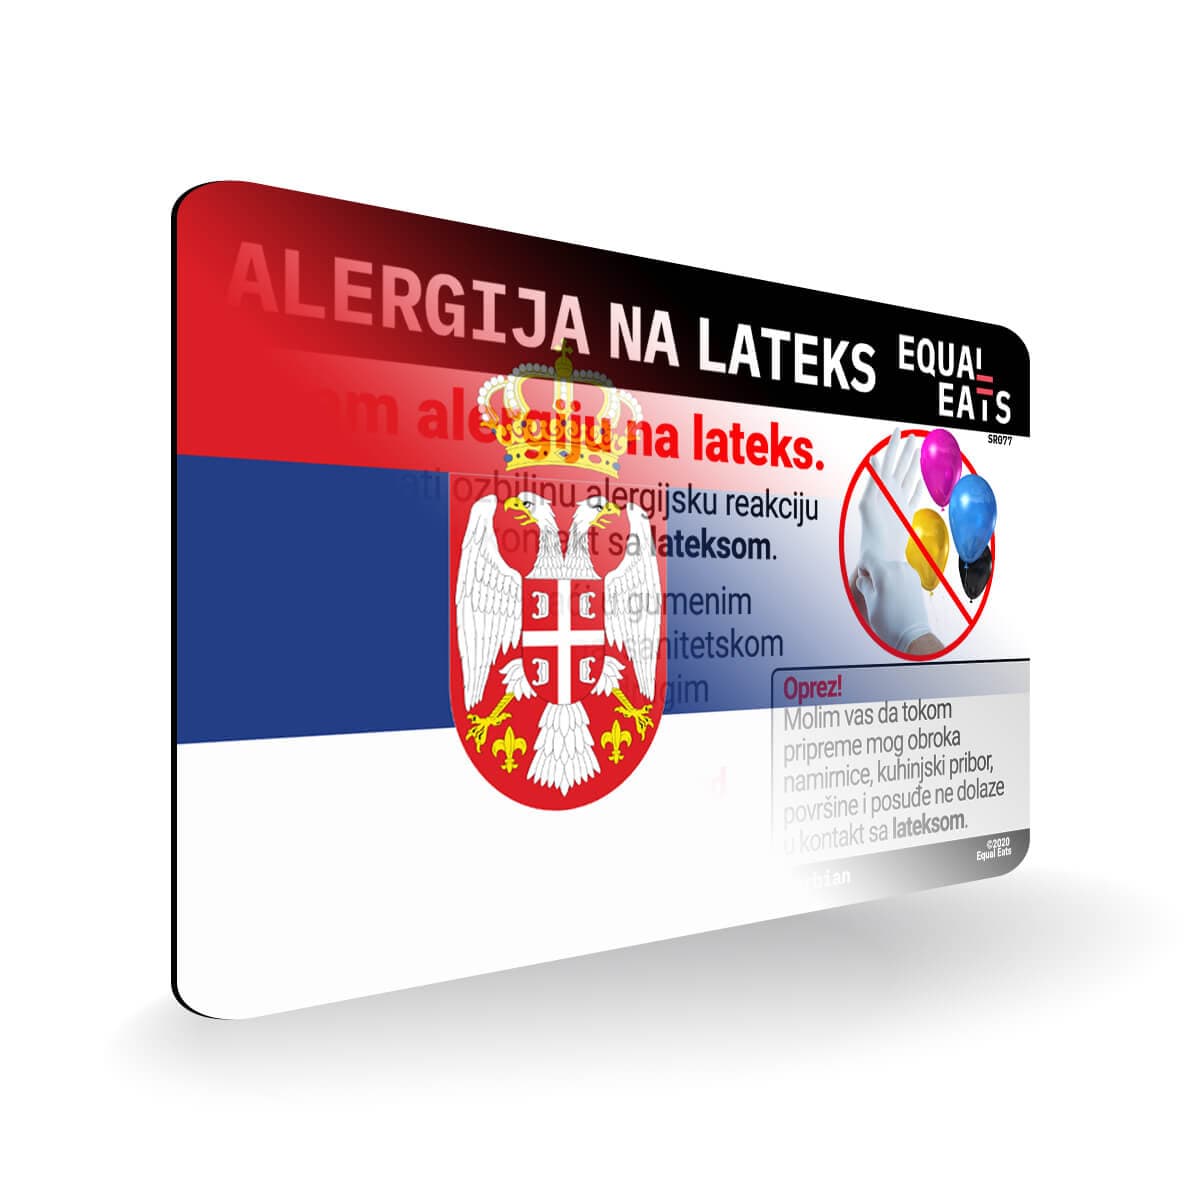 Latex Allergy in Serbian. Latex Allergy Travel Card for Serbia